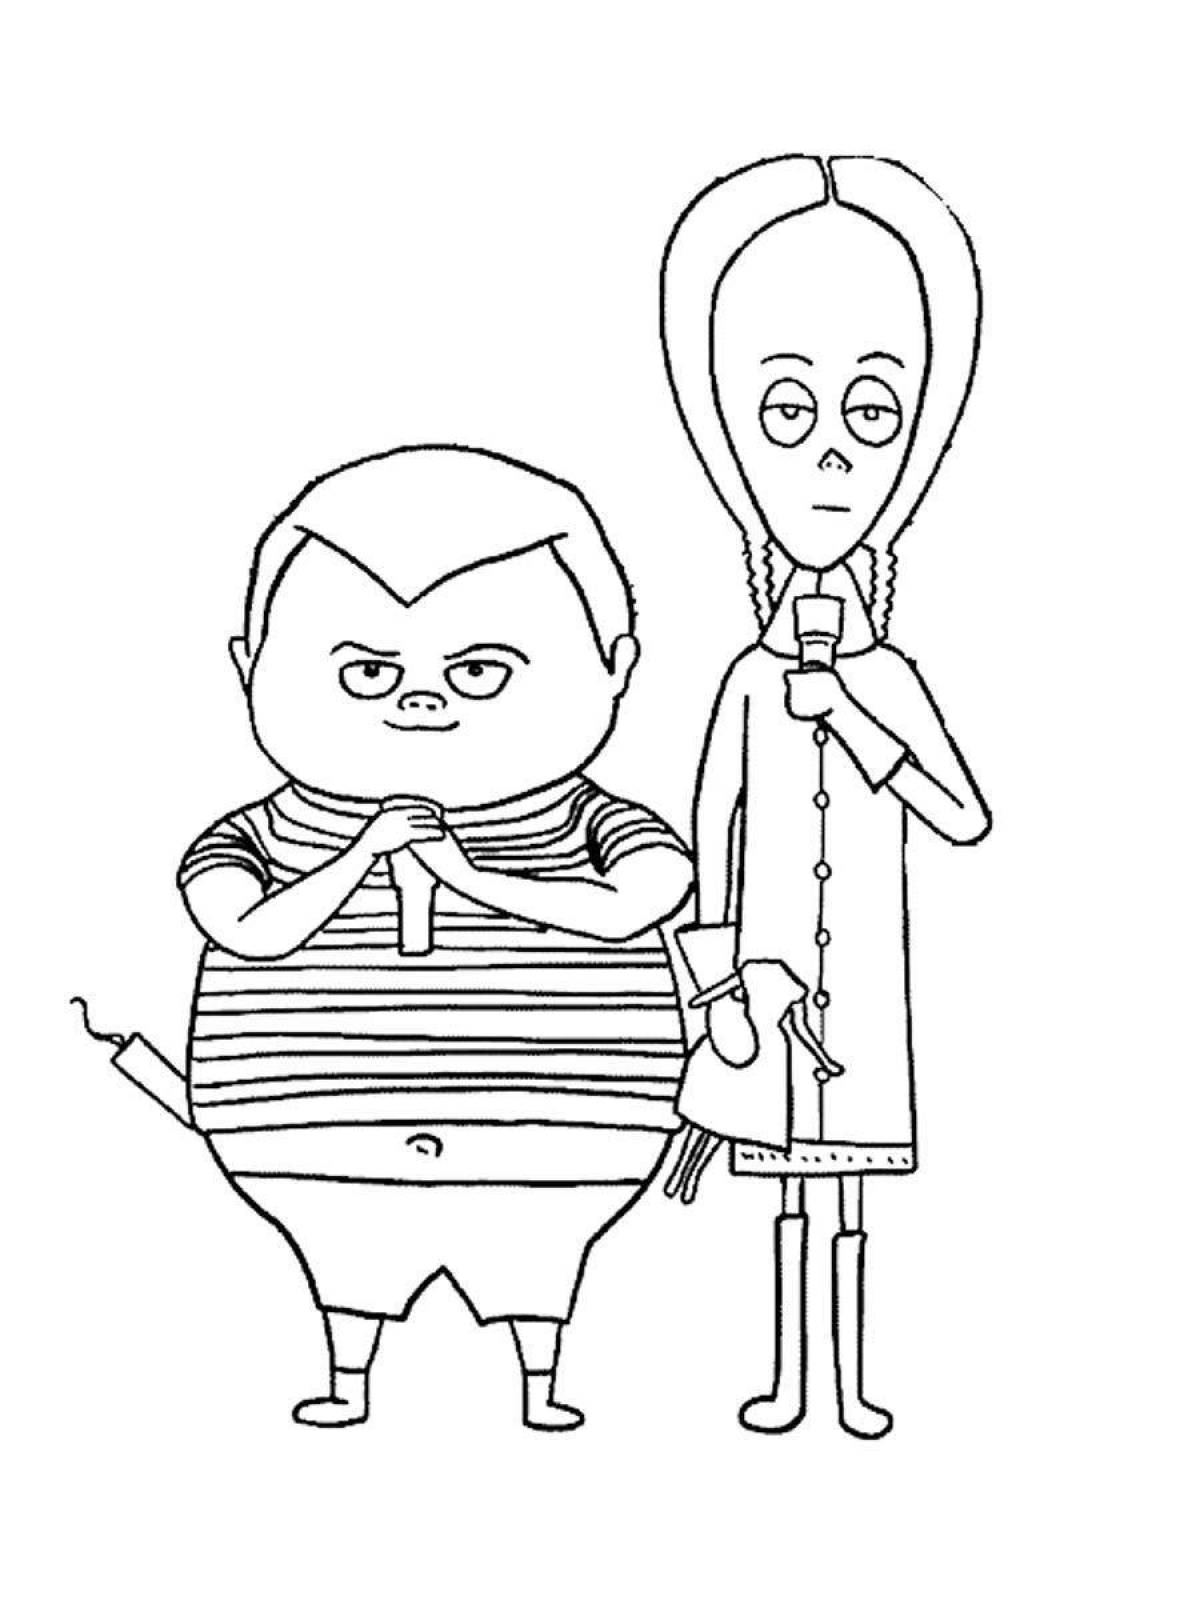 Unnerving Addams Family coloring book